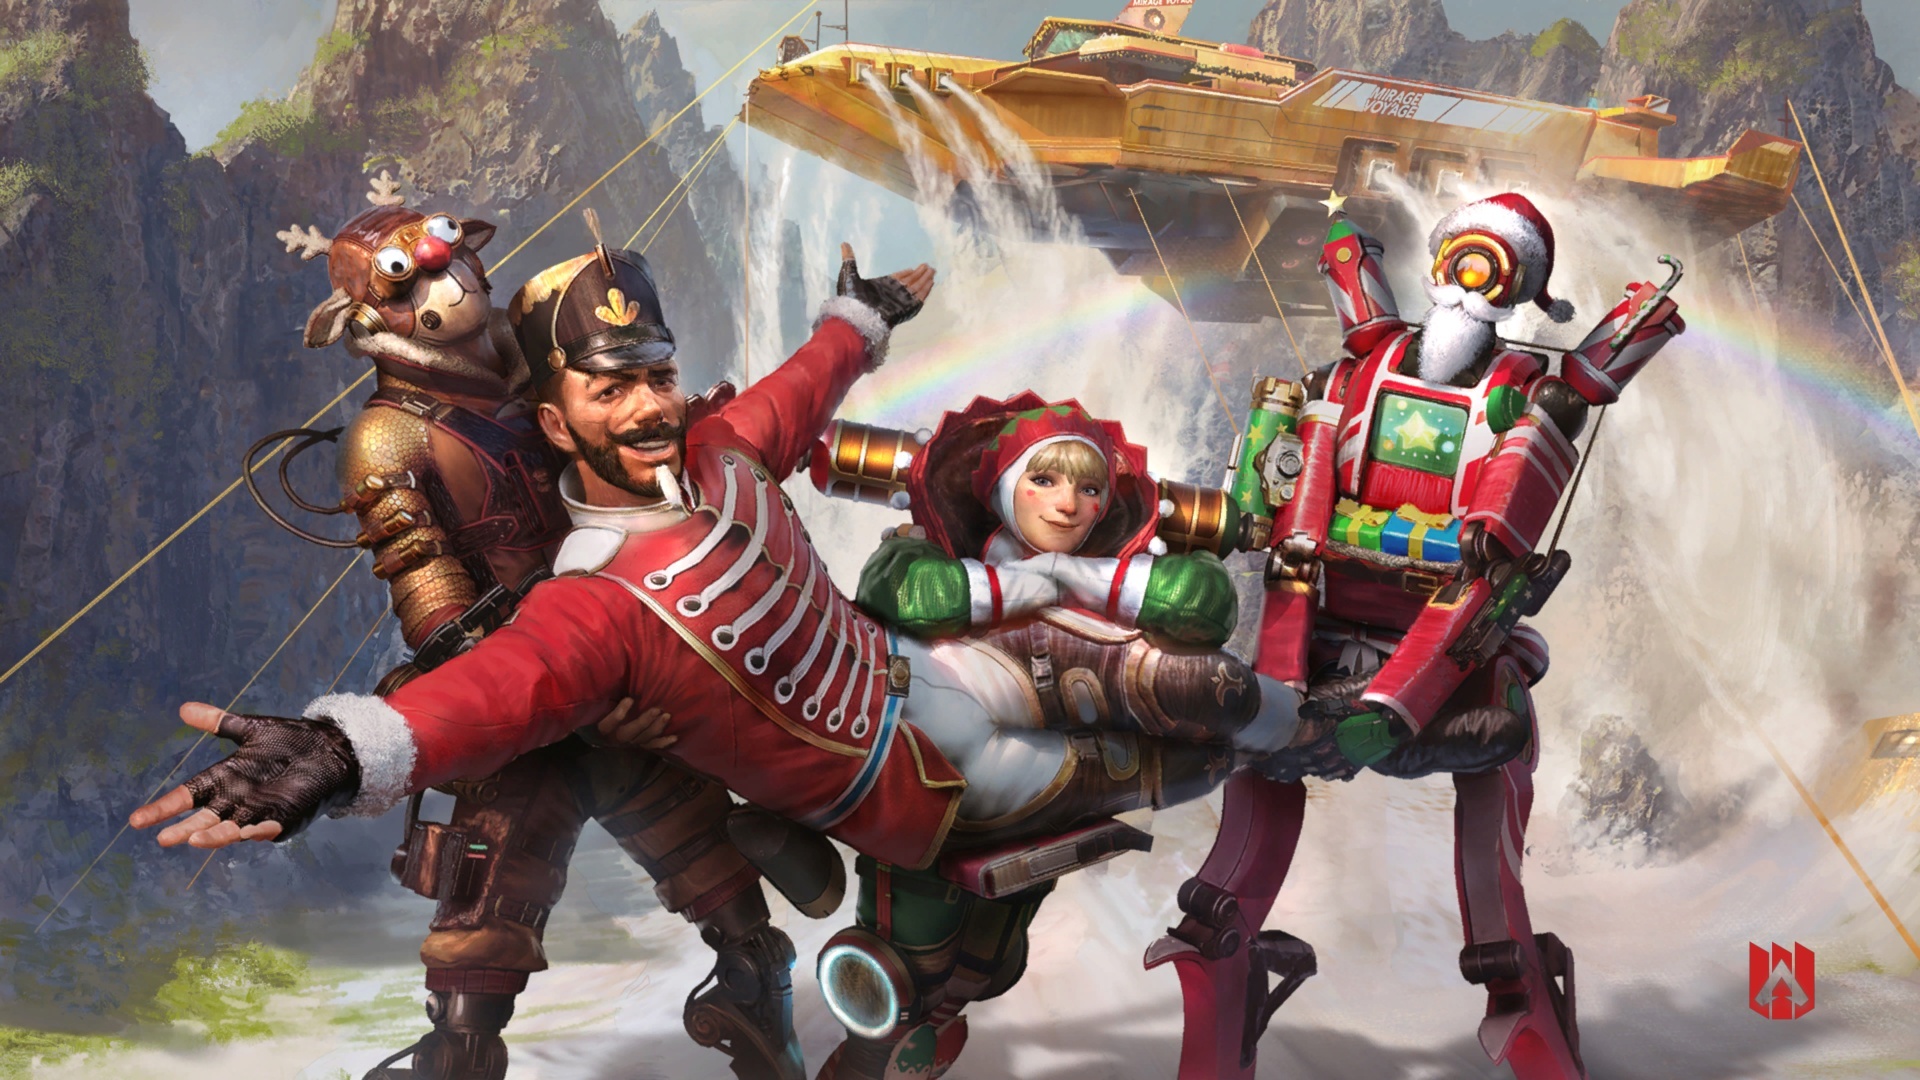 Apex Legends: Holo-Day Bash event, The "Winter Express" mode. 1920x1080 Full HD Background.